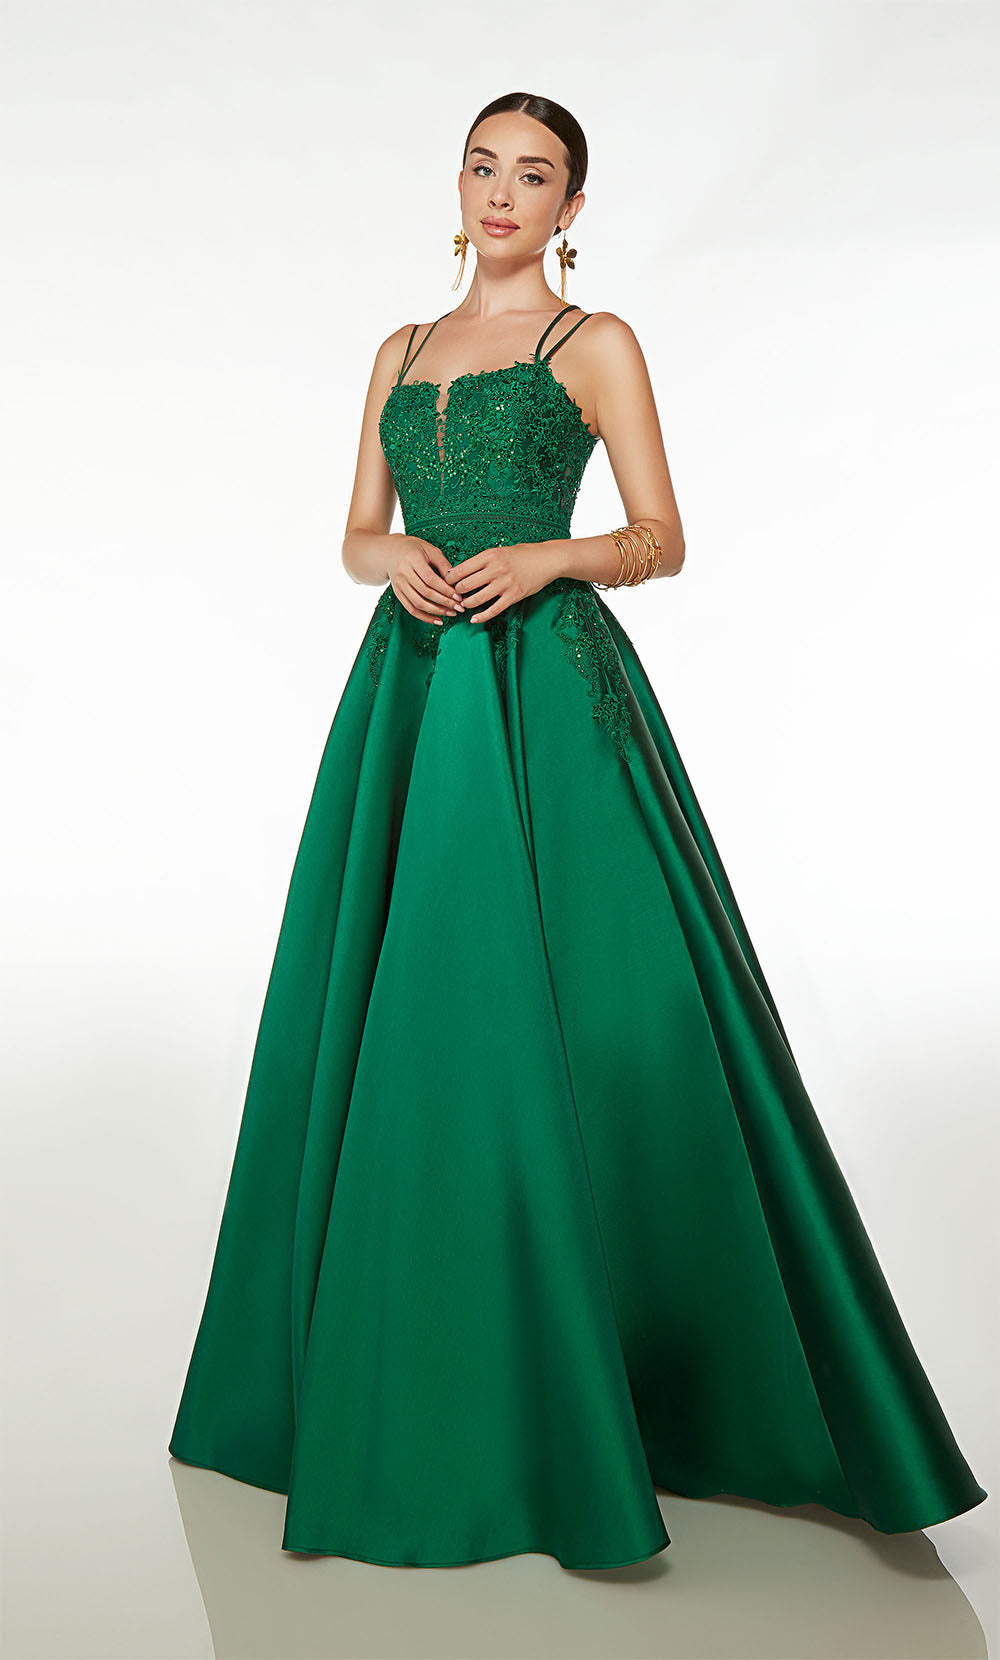 Alyce-61570-Plunging-Neckline-Strappy-Back-Lace-Mikado-Ball-Gown-Emerald-Evening-Dress-B-Chic-Fashions-Prom-Dress